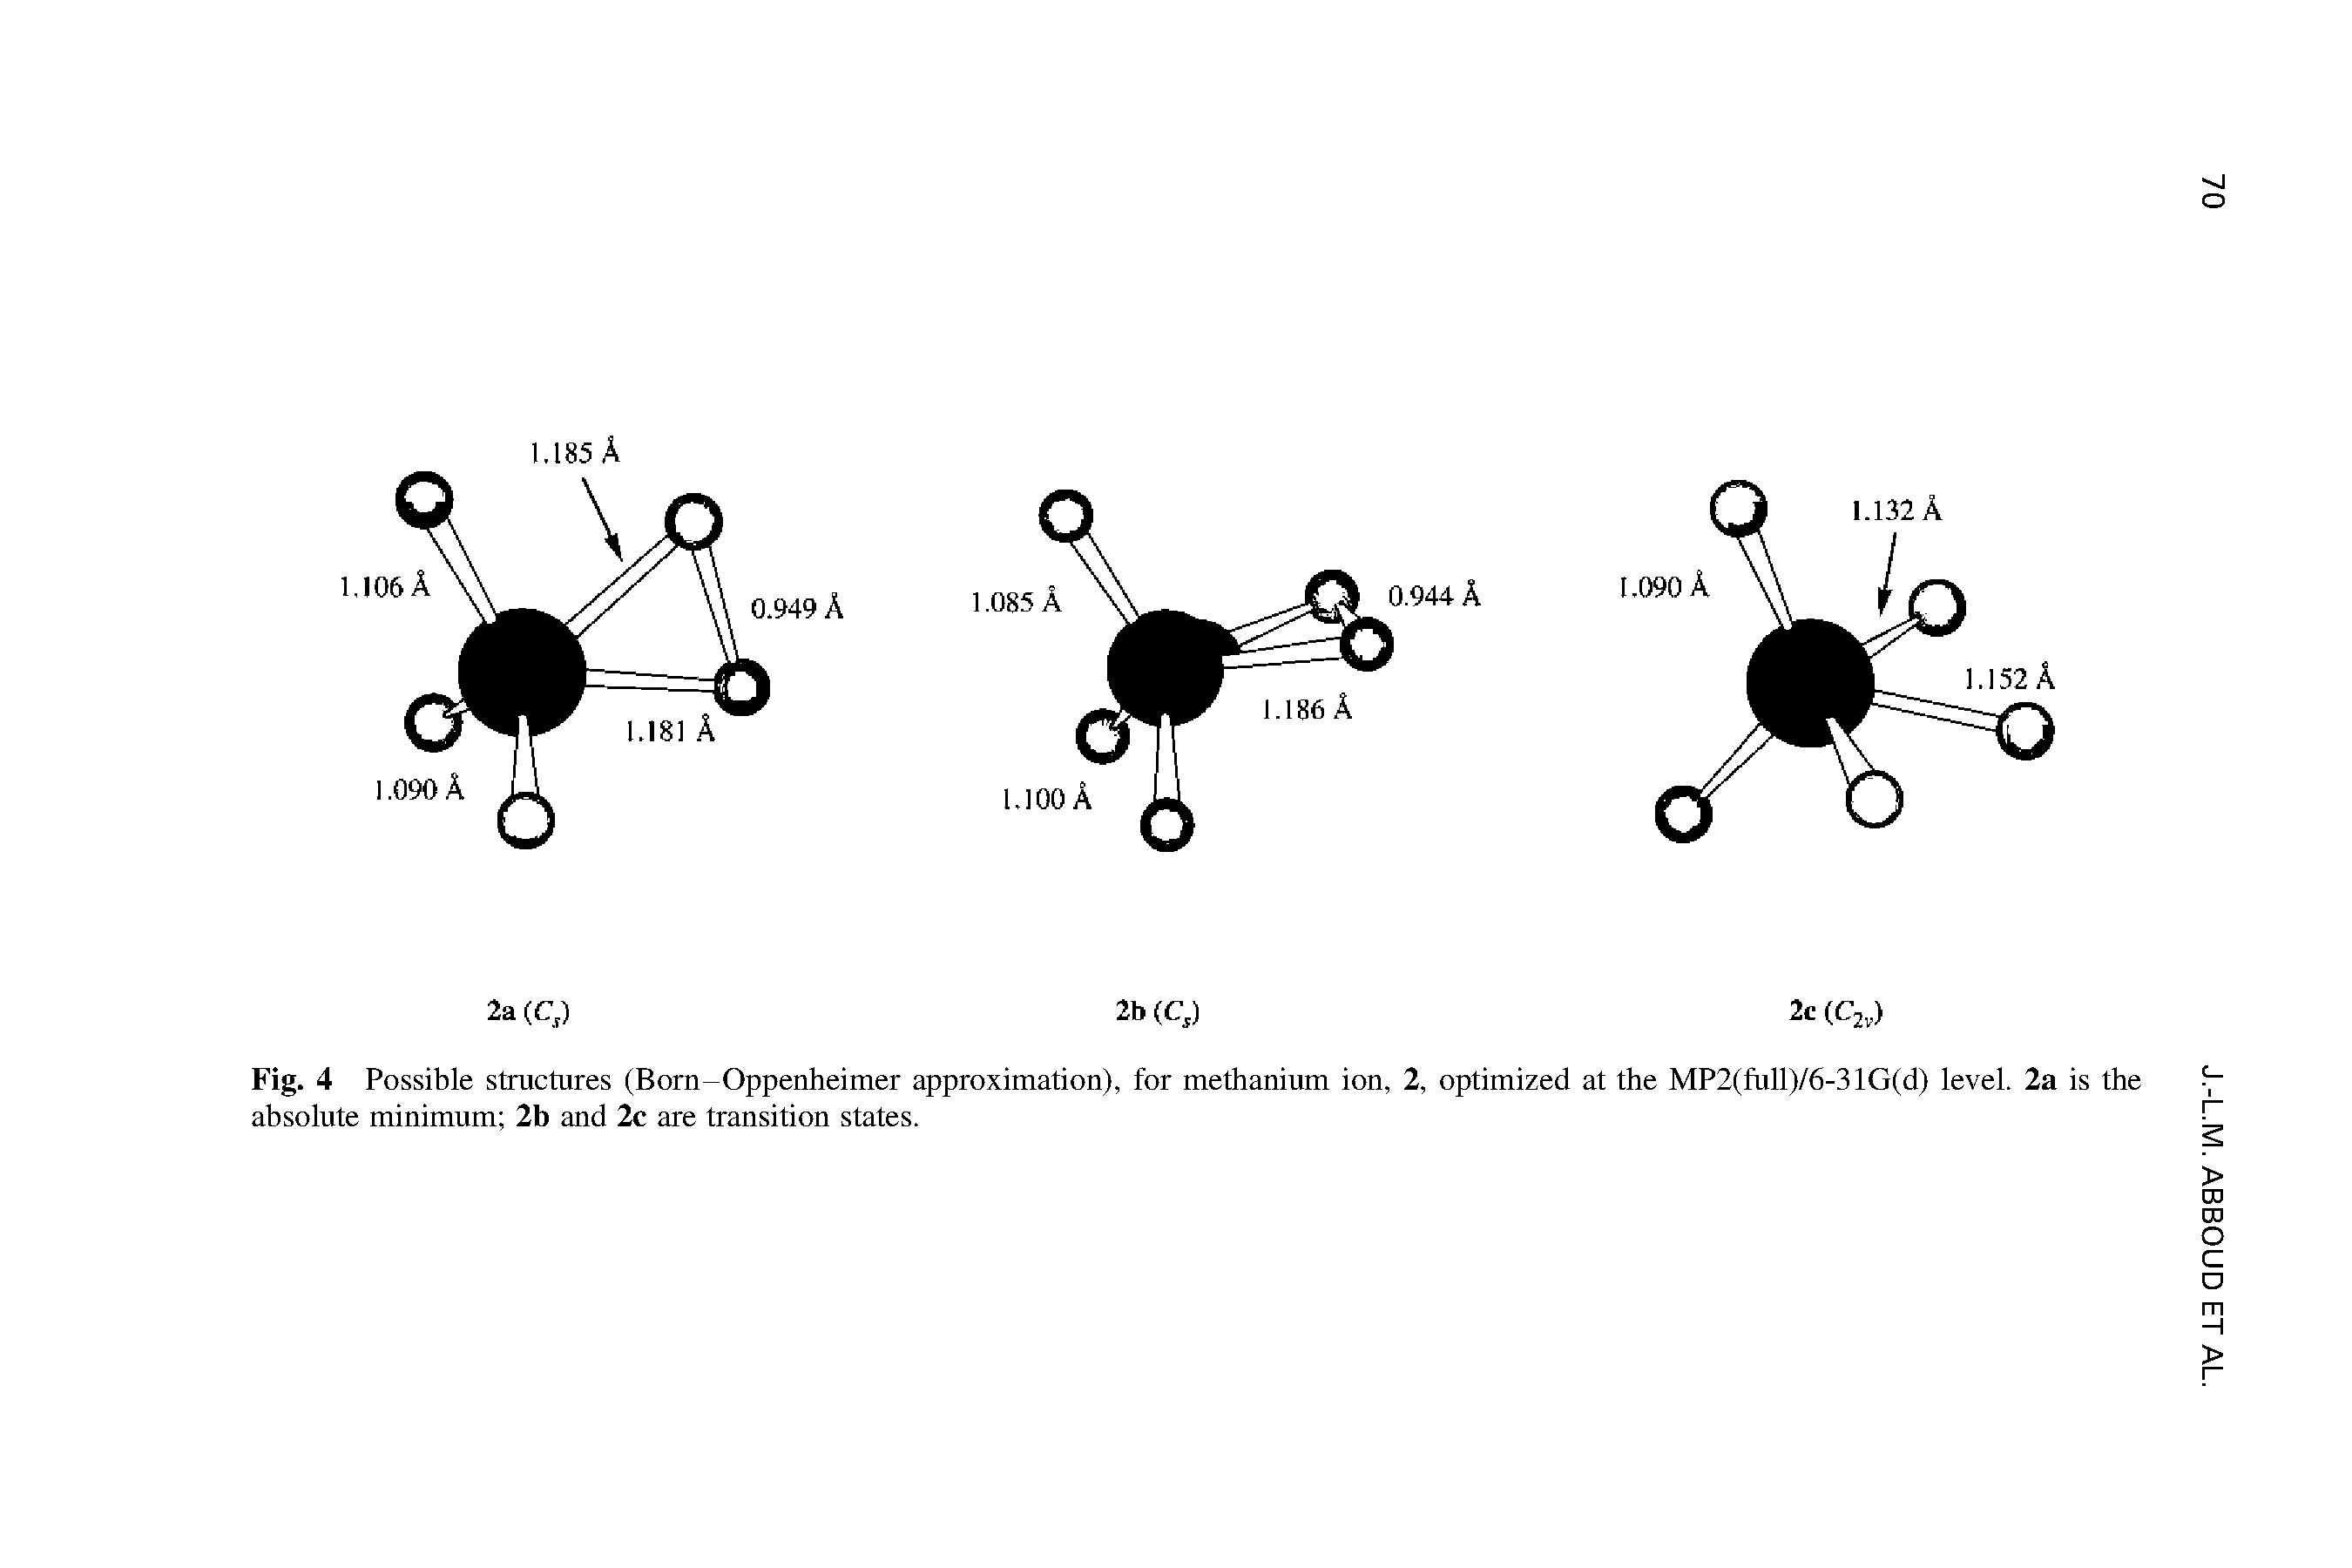 Fig. 4 Possible structures (Born-Oppenheimer approximation), for methanium ion, 2, optimized at the MP2(full)/6-31G(d) level. 2a is the absolute minimum 2b and 2c are transition states.